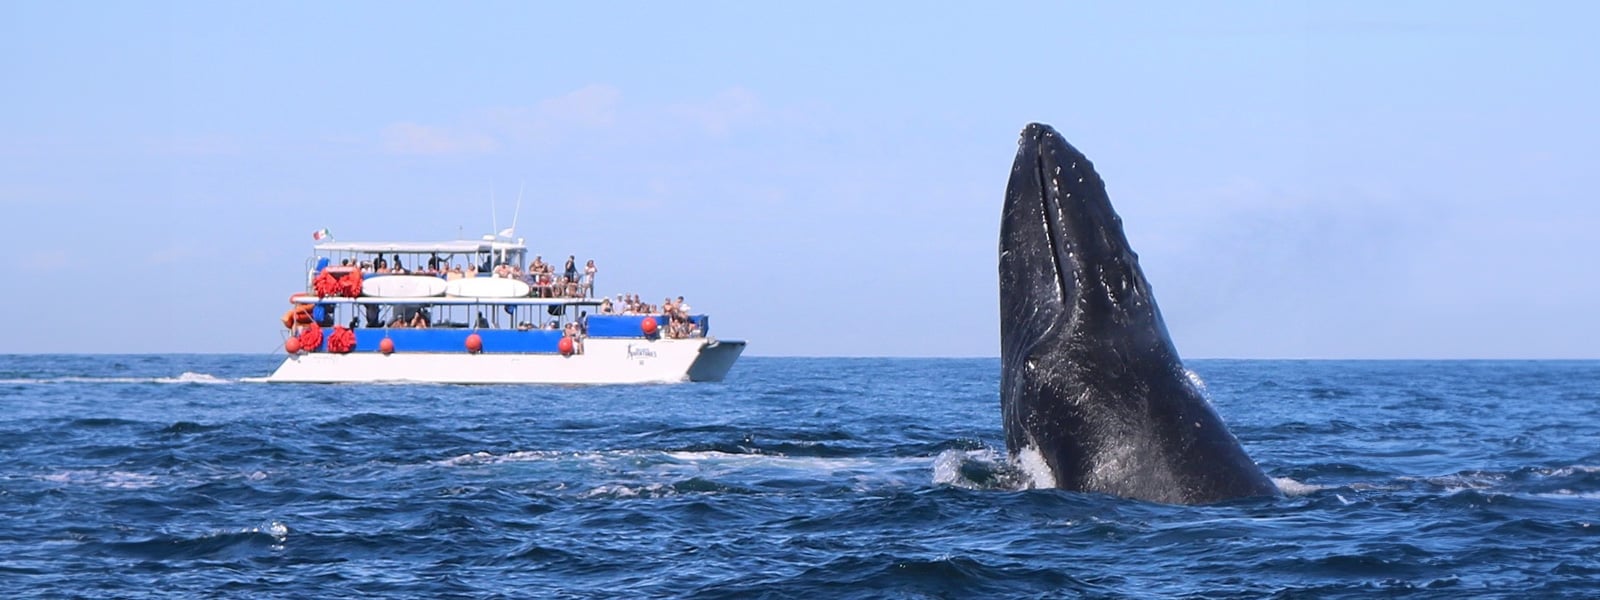 Go whale watching in Puerto Vallarta on a comfortable boat